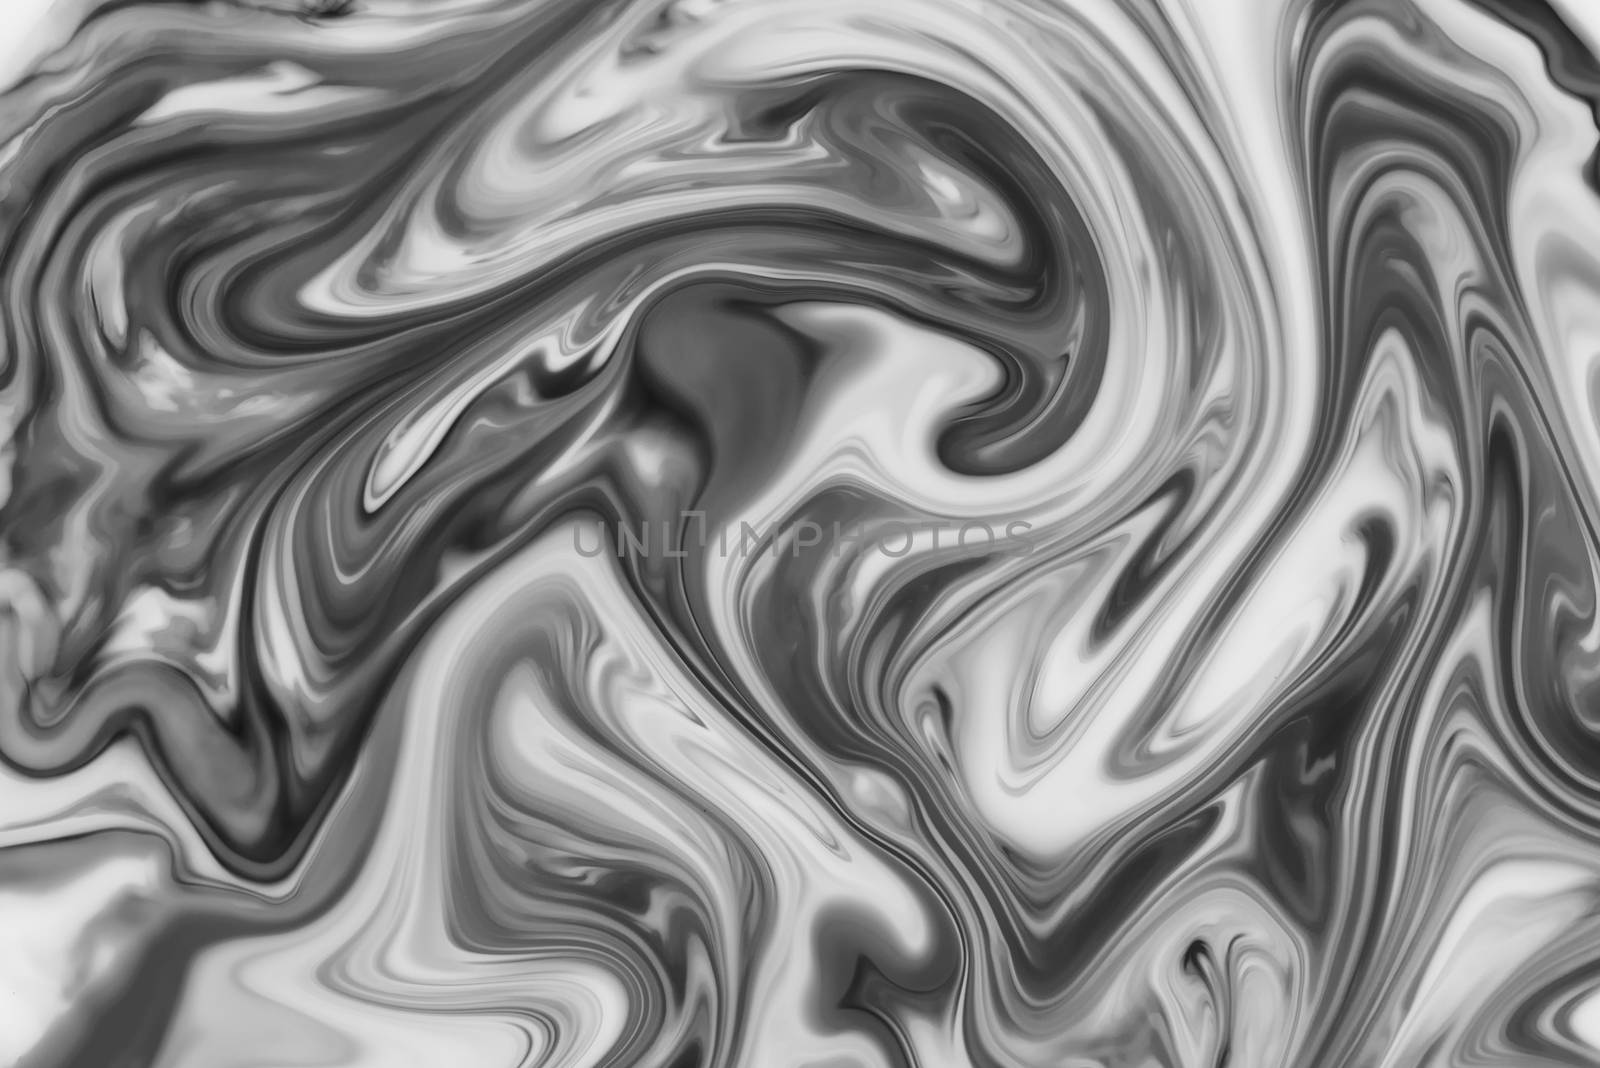 Abstract fluid pattern. Black and white background. Decorative texture illustration